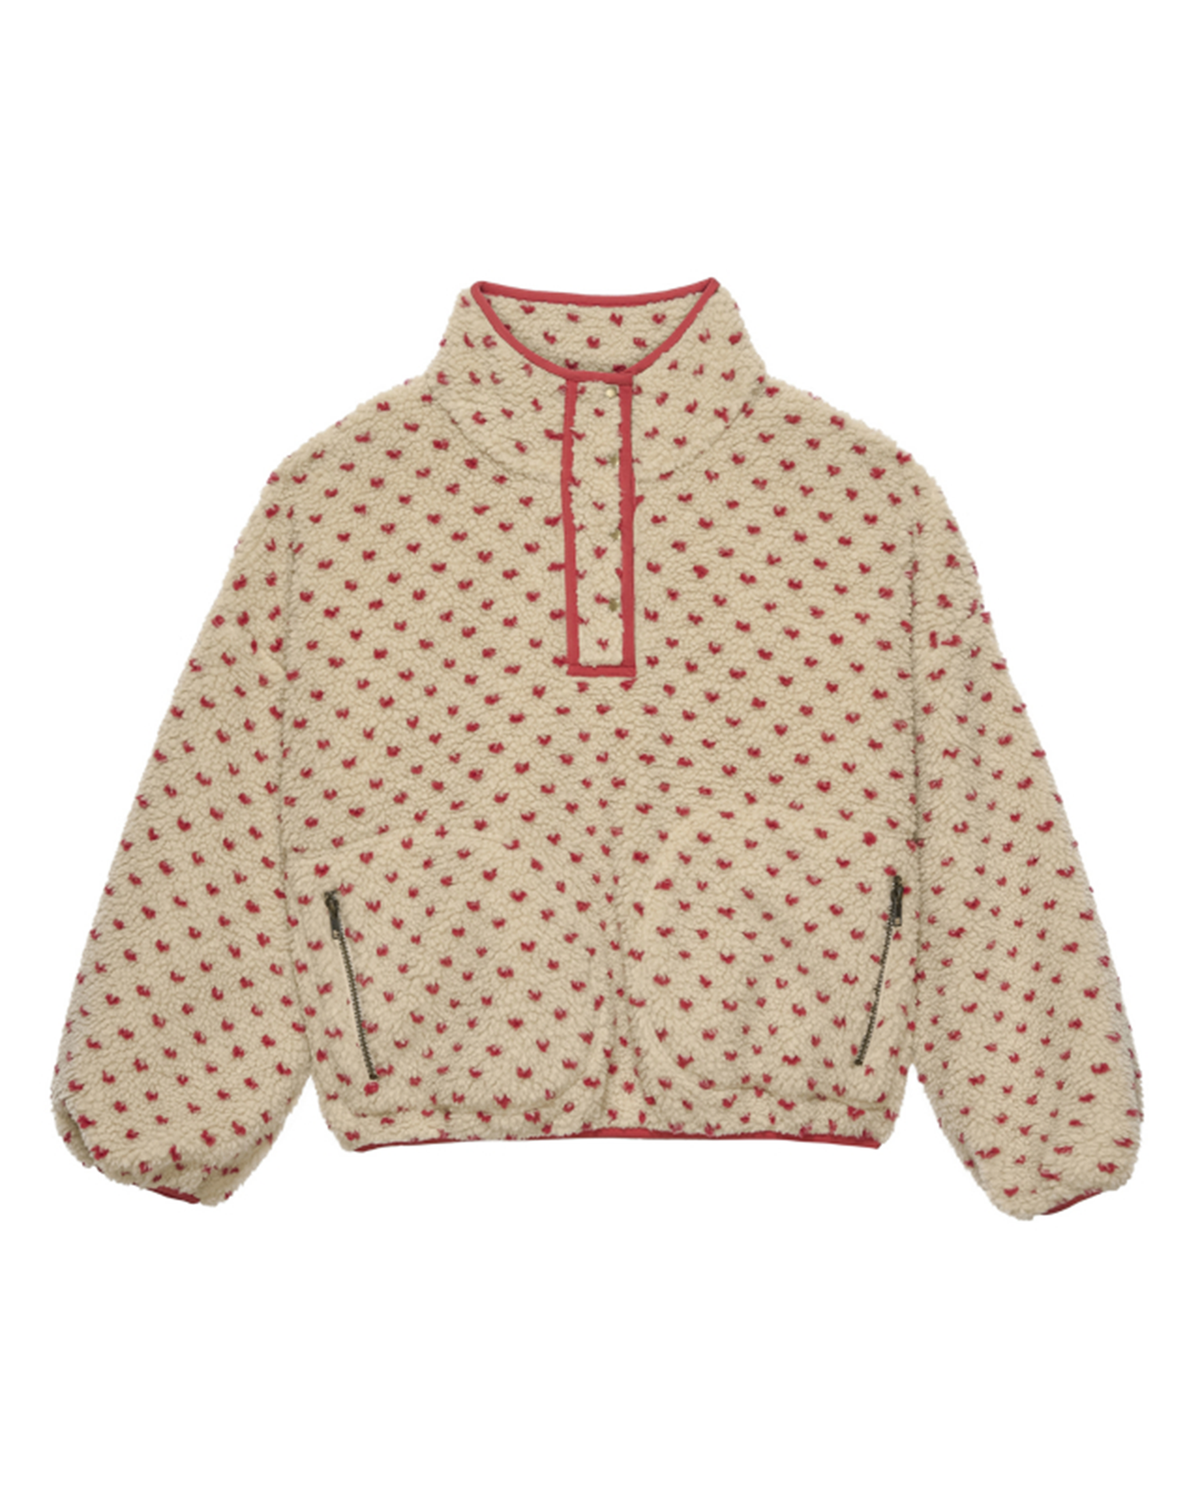 The Countryside Pullover in Oat w/ Red